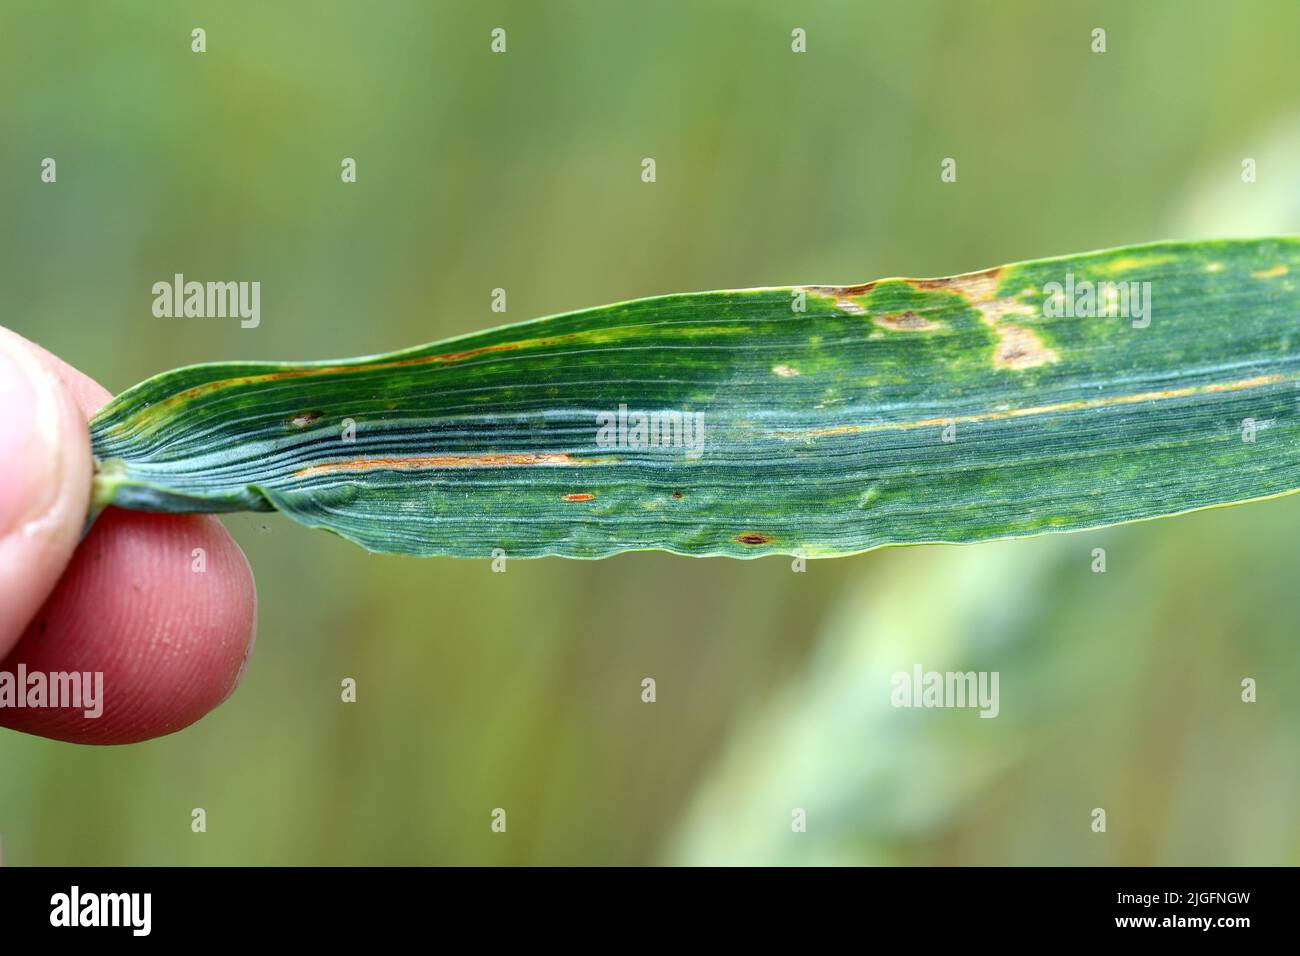 Symptoms of fungal infection on a cereal leaf. Stock Photo